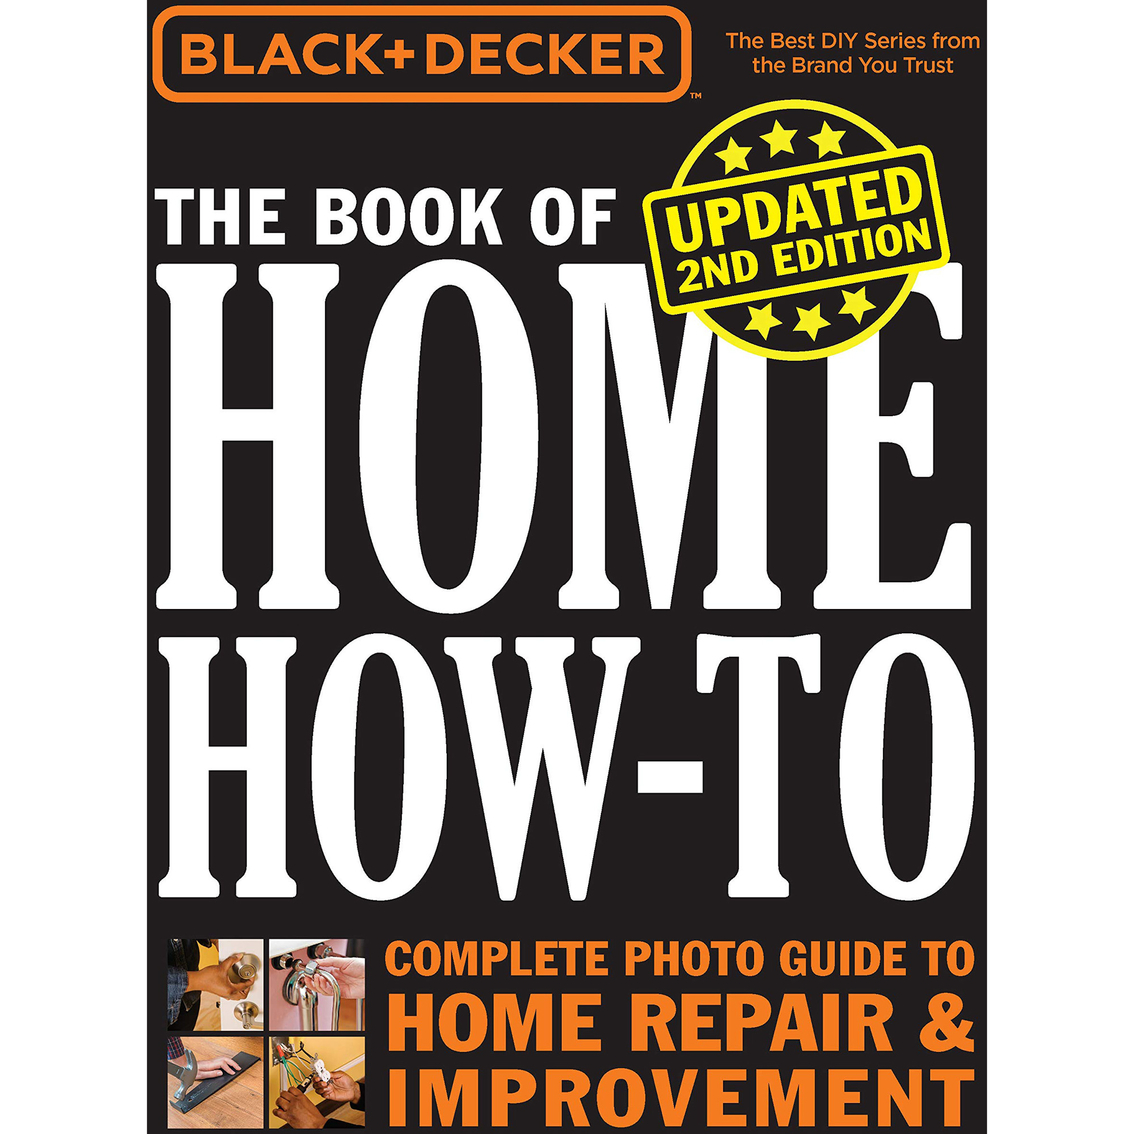 Black+decker The Book Of Home How-to, Fiction & Literature, Household